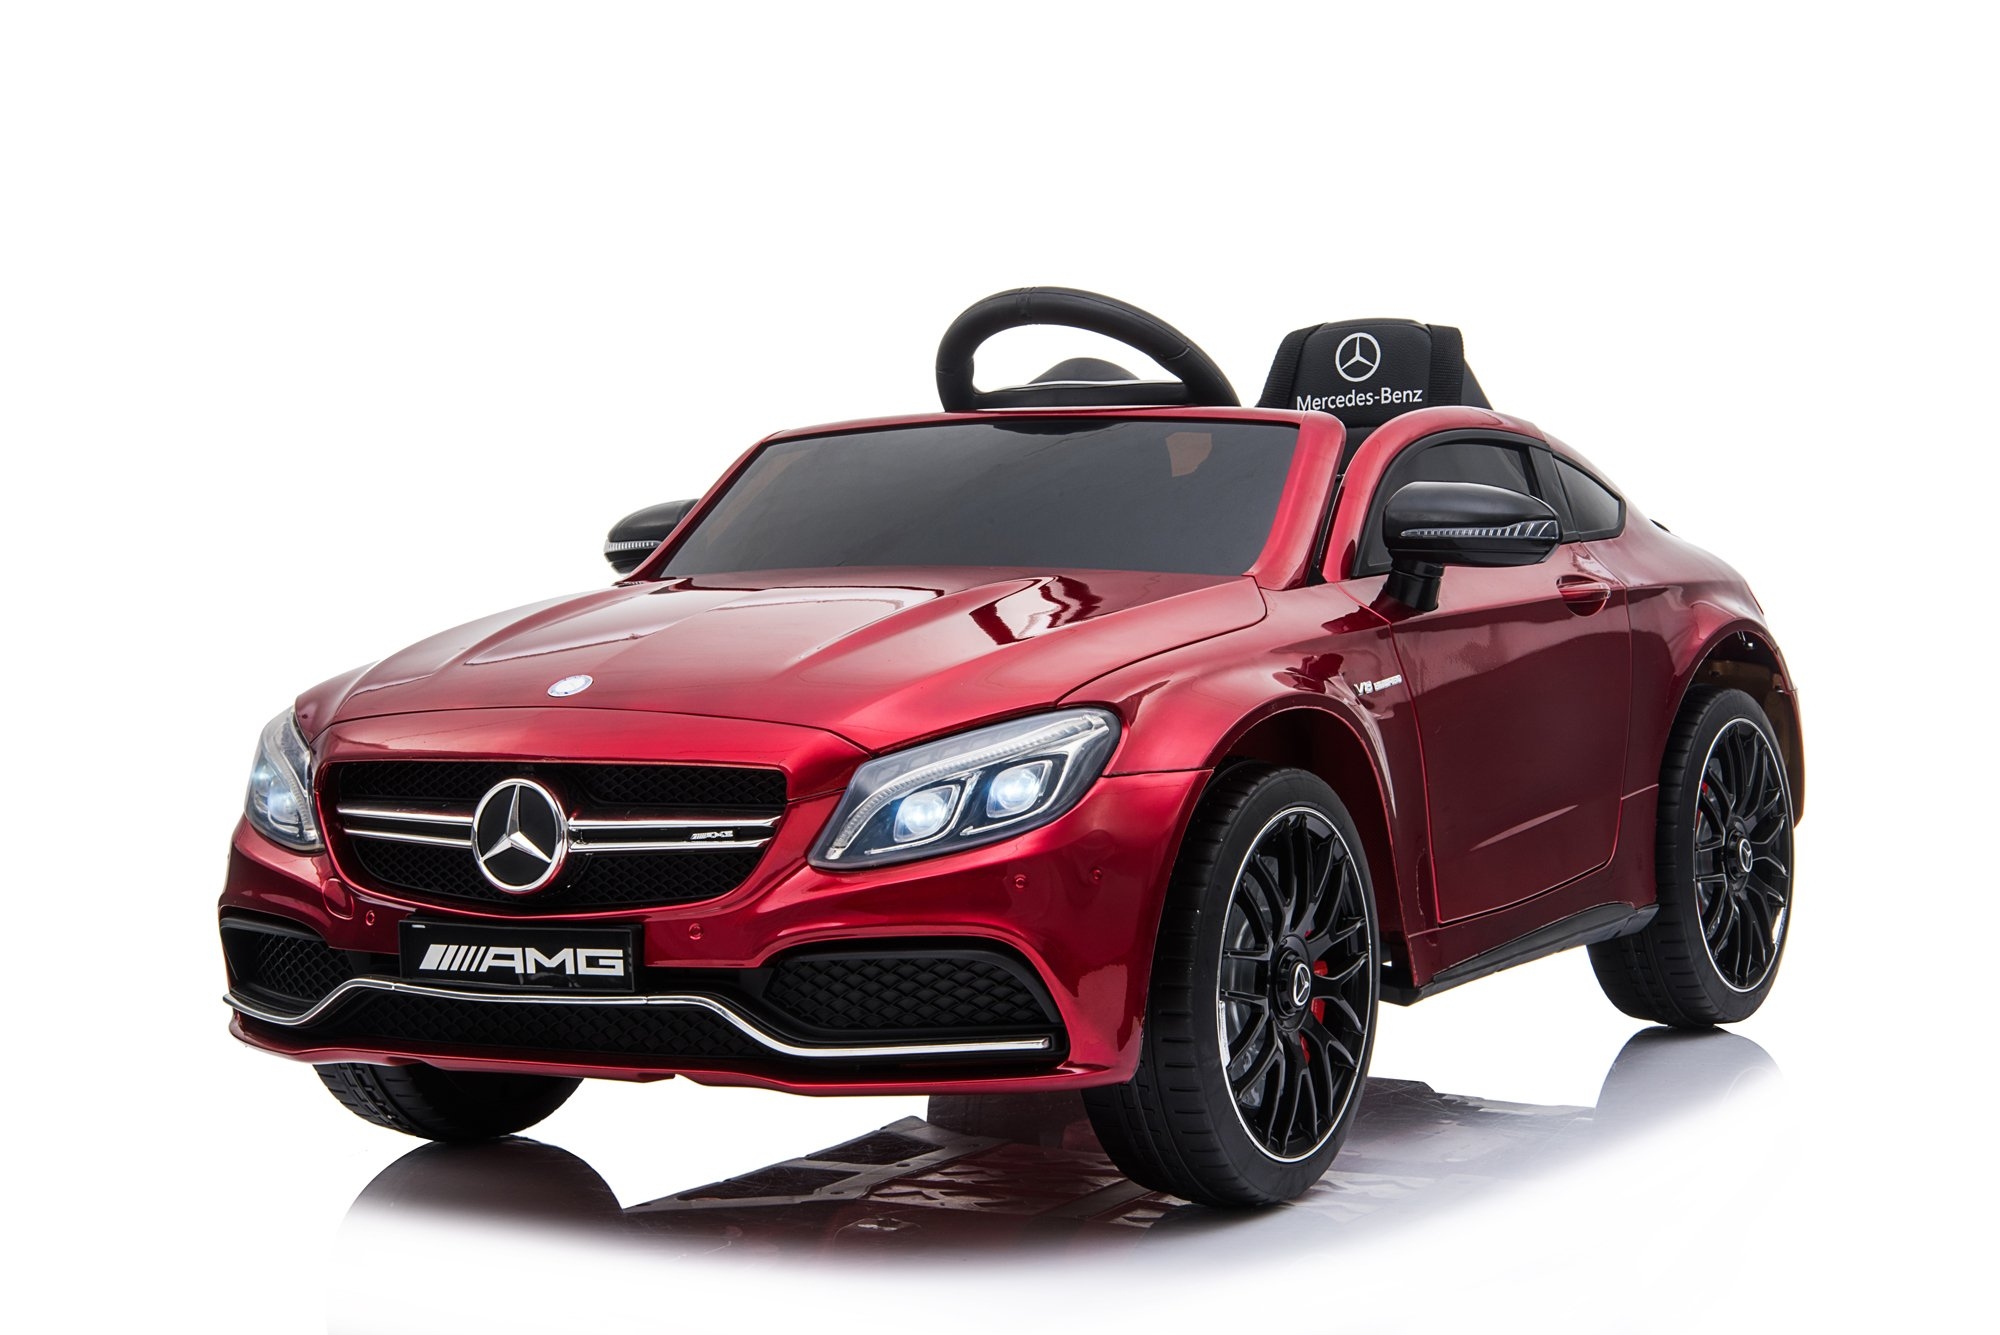 Licensed Mercedes C63 AMG – 12V Electric Ride On Car + Leather Seat – Metallic Wine Red